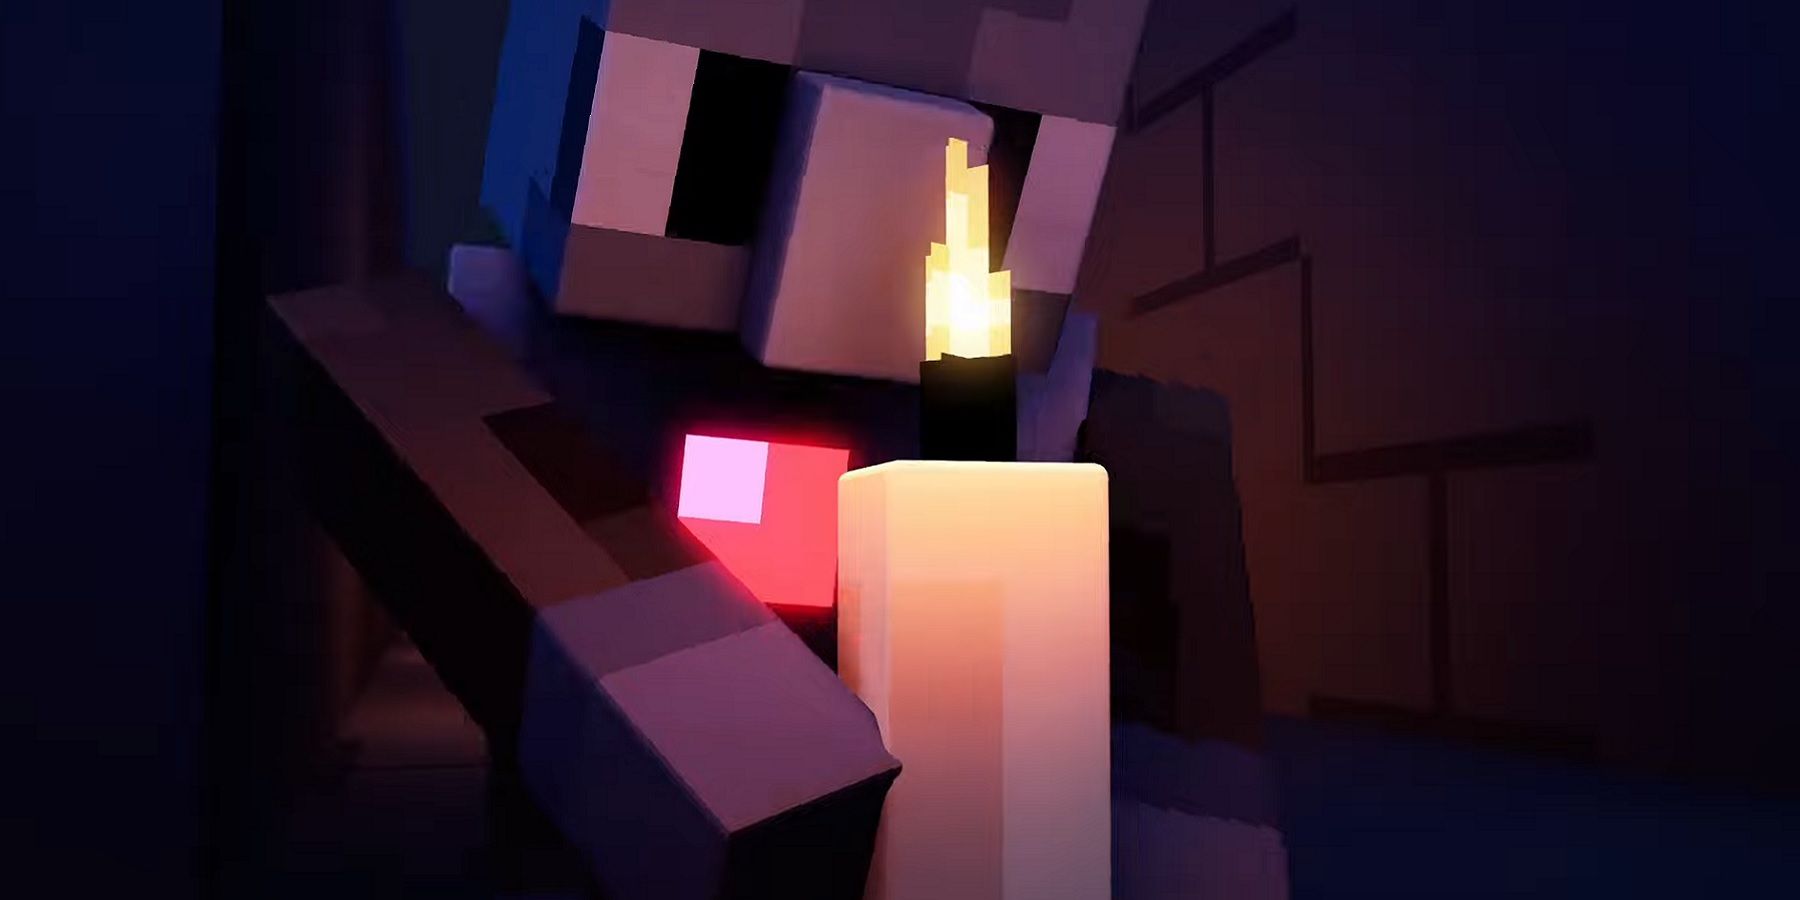 Image from Minecraft showing a character placing a large candle on the ground.